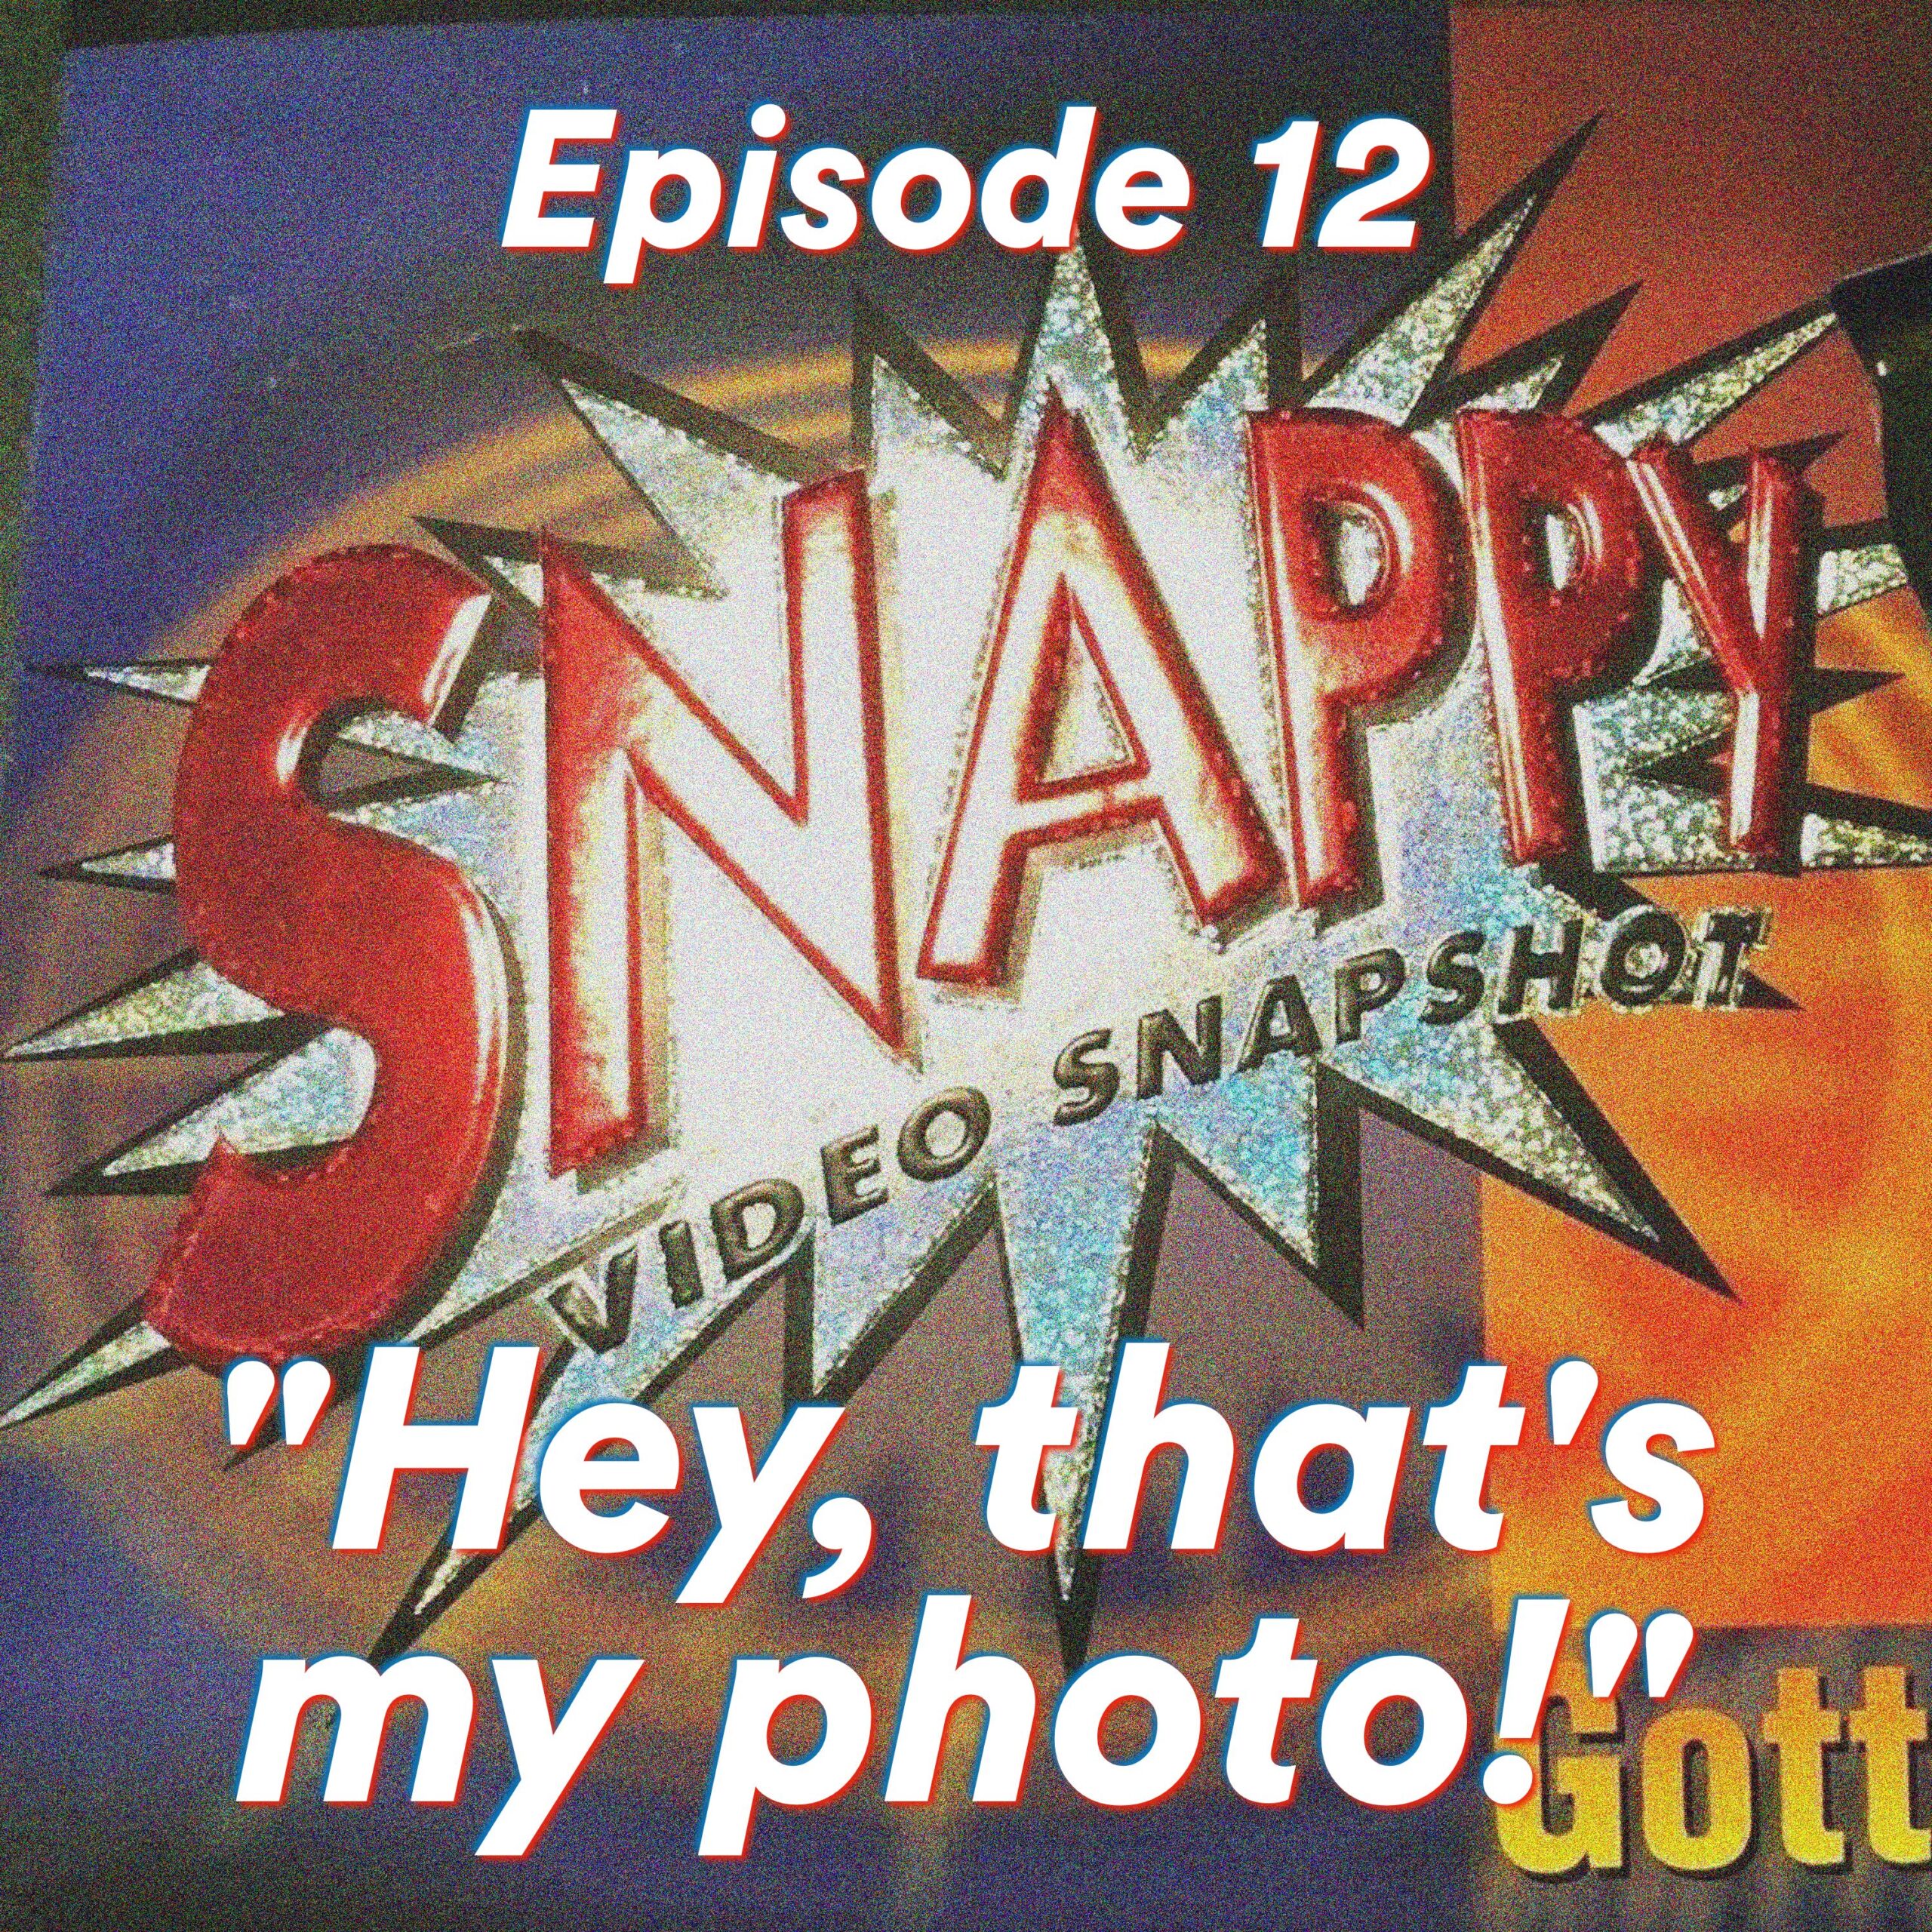 Episode 12: “Hey, that’s my photo!”